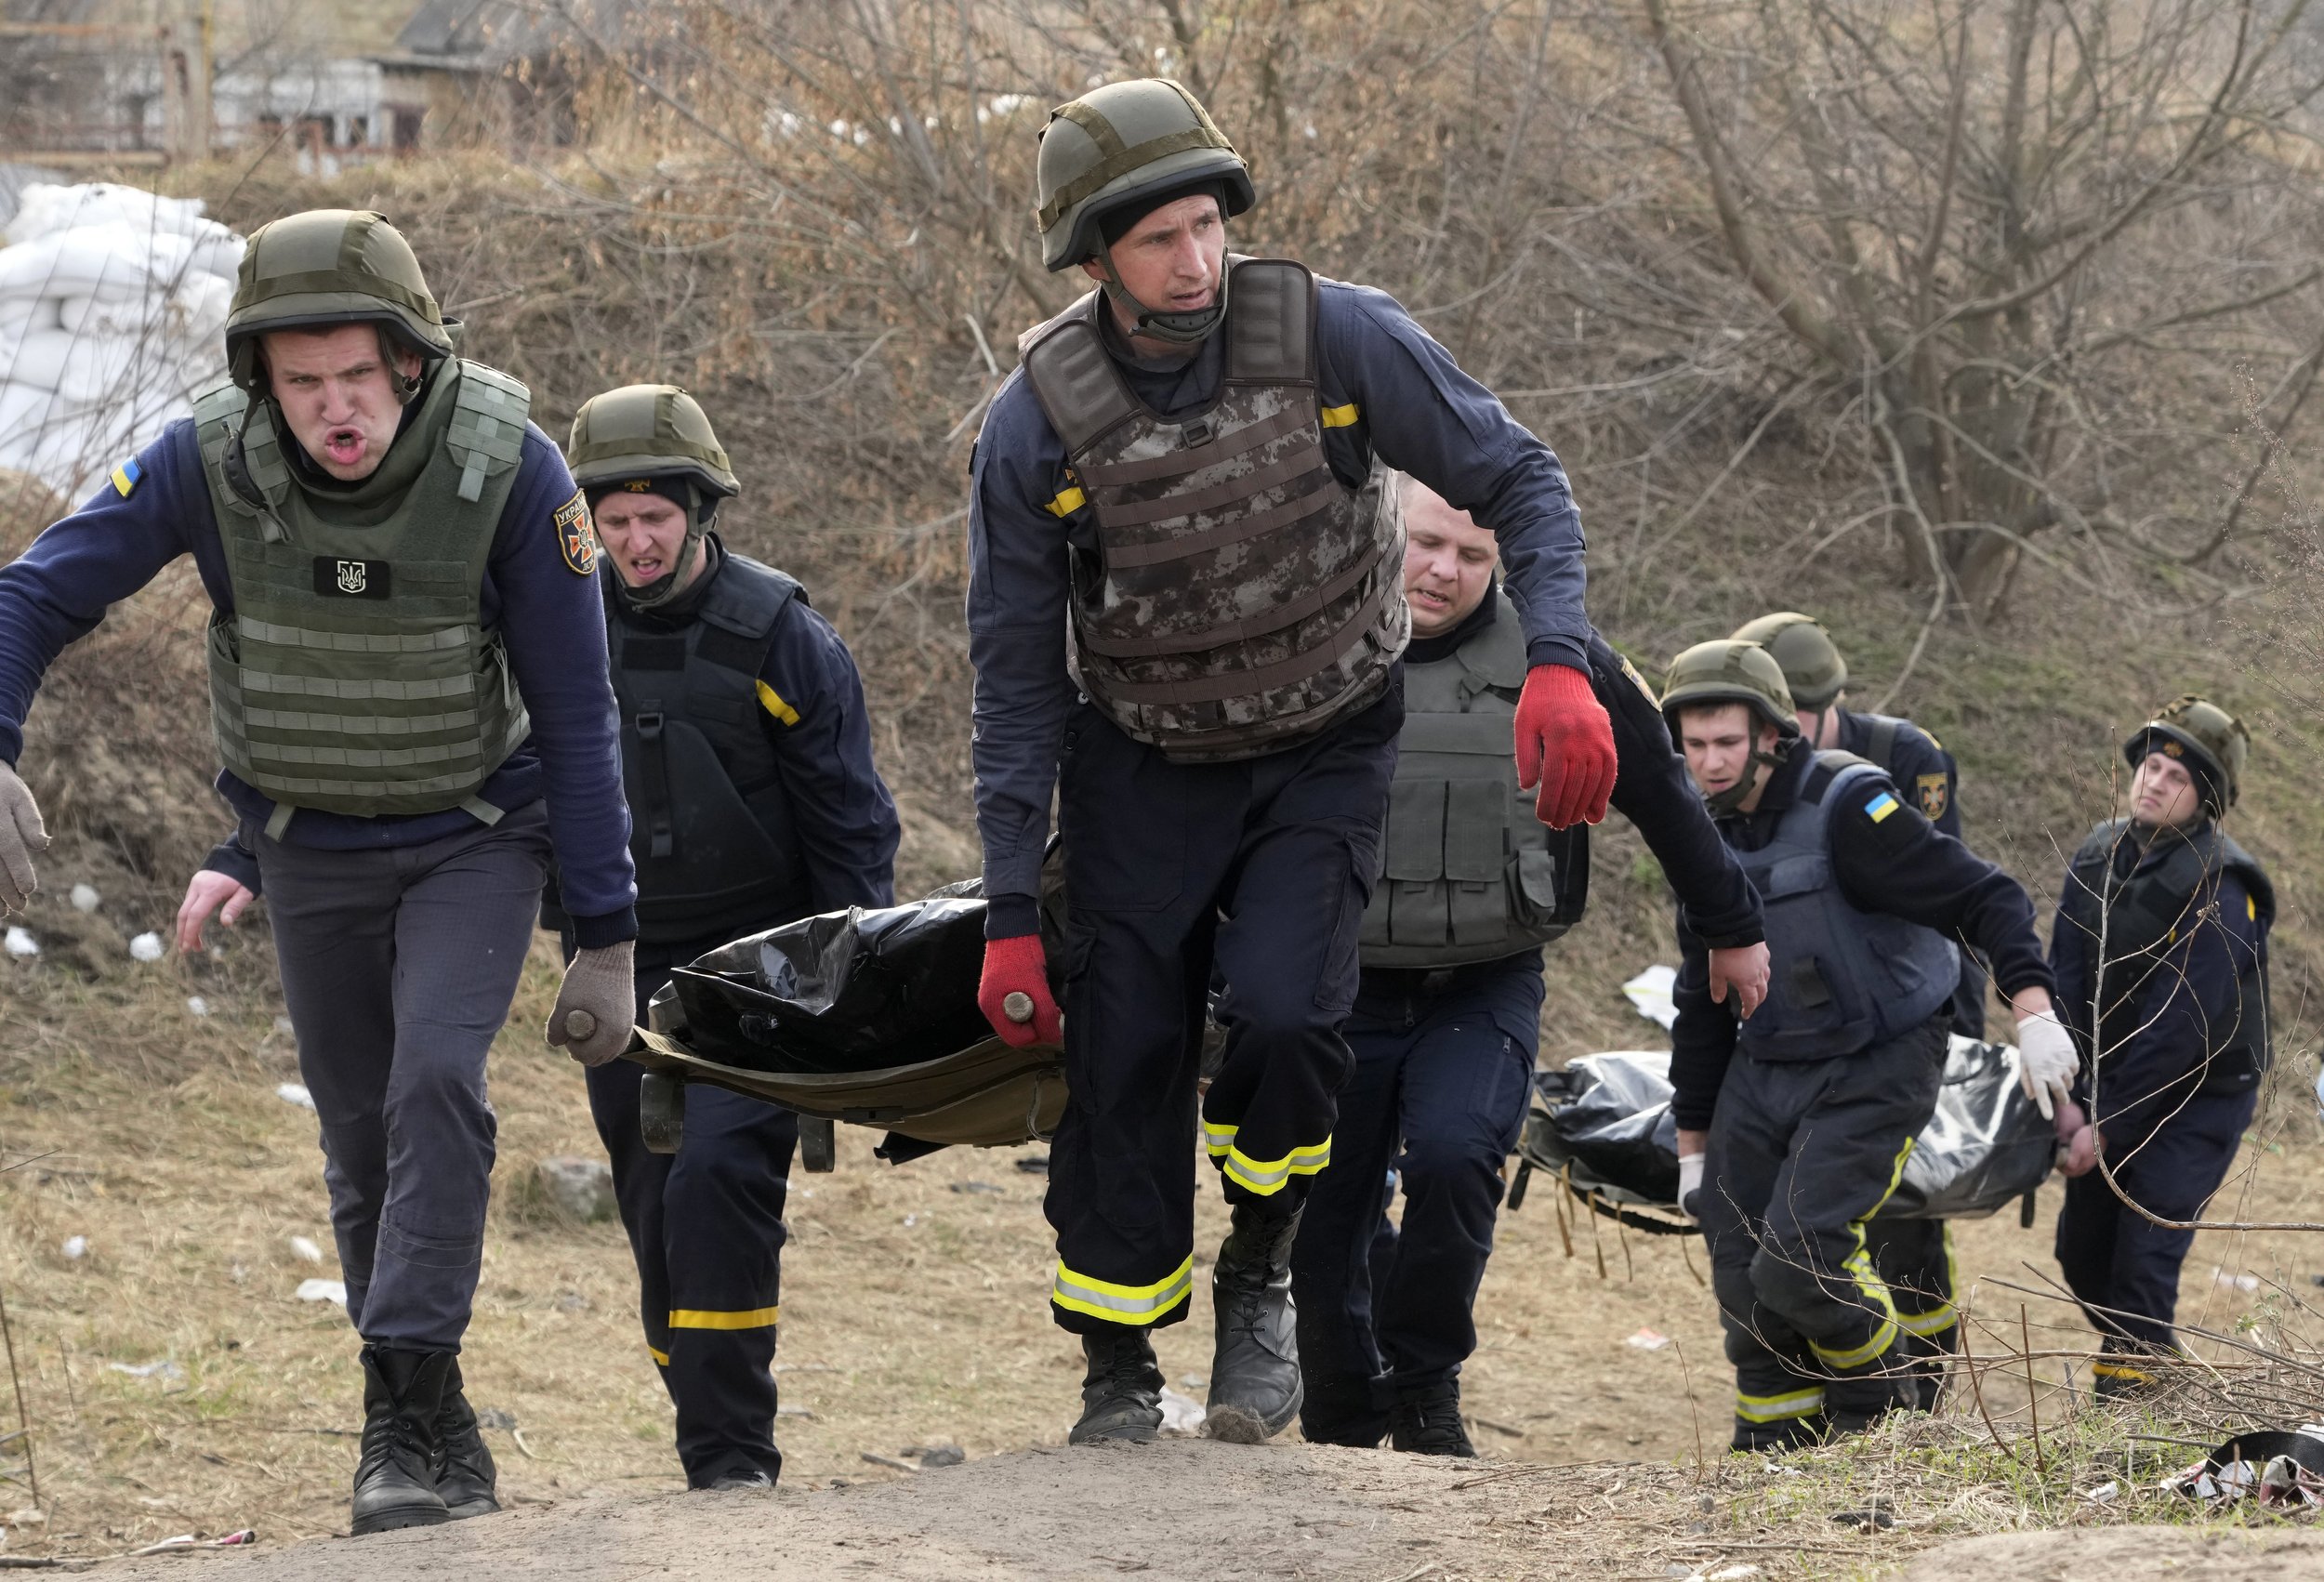  Ukrainian soldiers carry bodies of civilians killed by the Russian forces over the destroyed bridge in Irpin close to Kyiv, Ukraine, Thursday, March 31, 2022. (AP Photo/Efrem Lukatsky) 